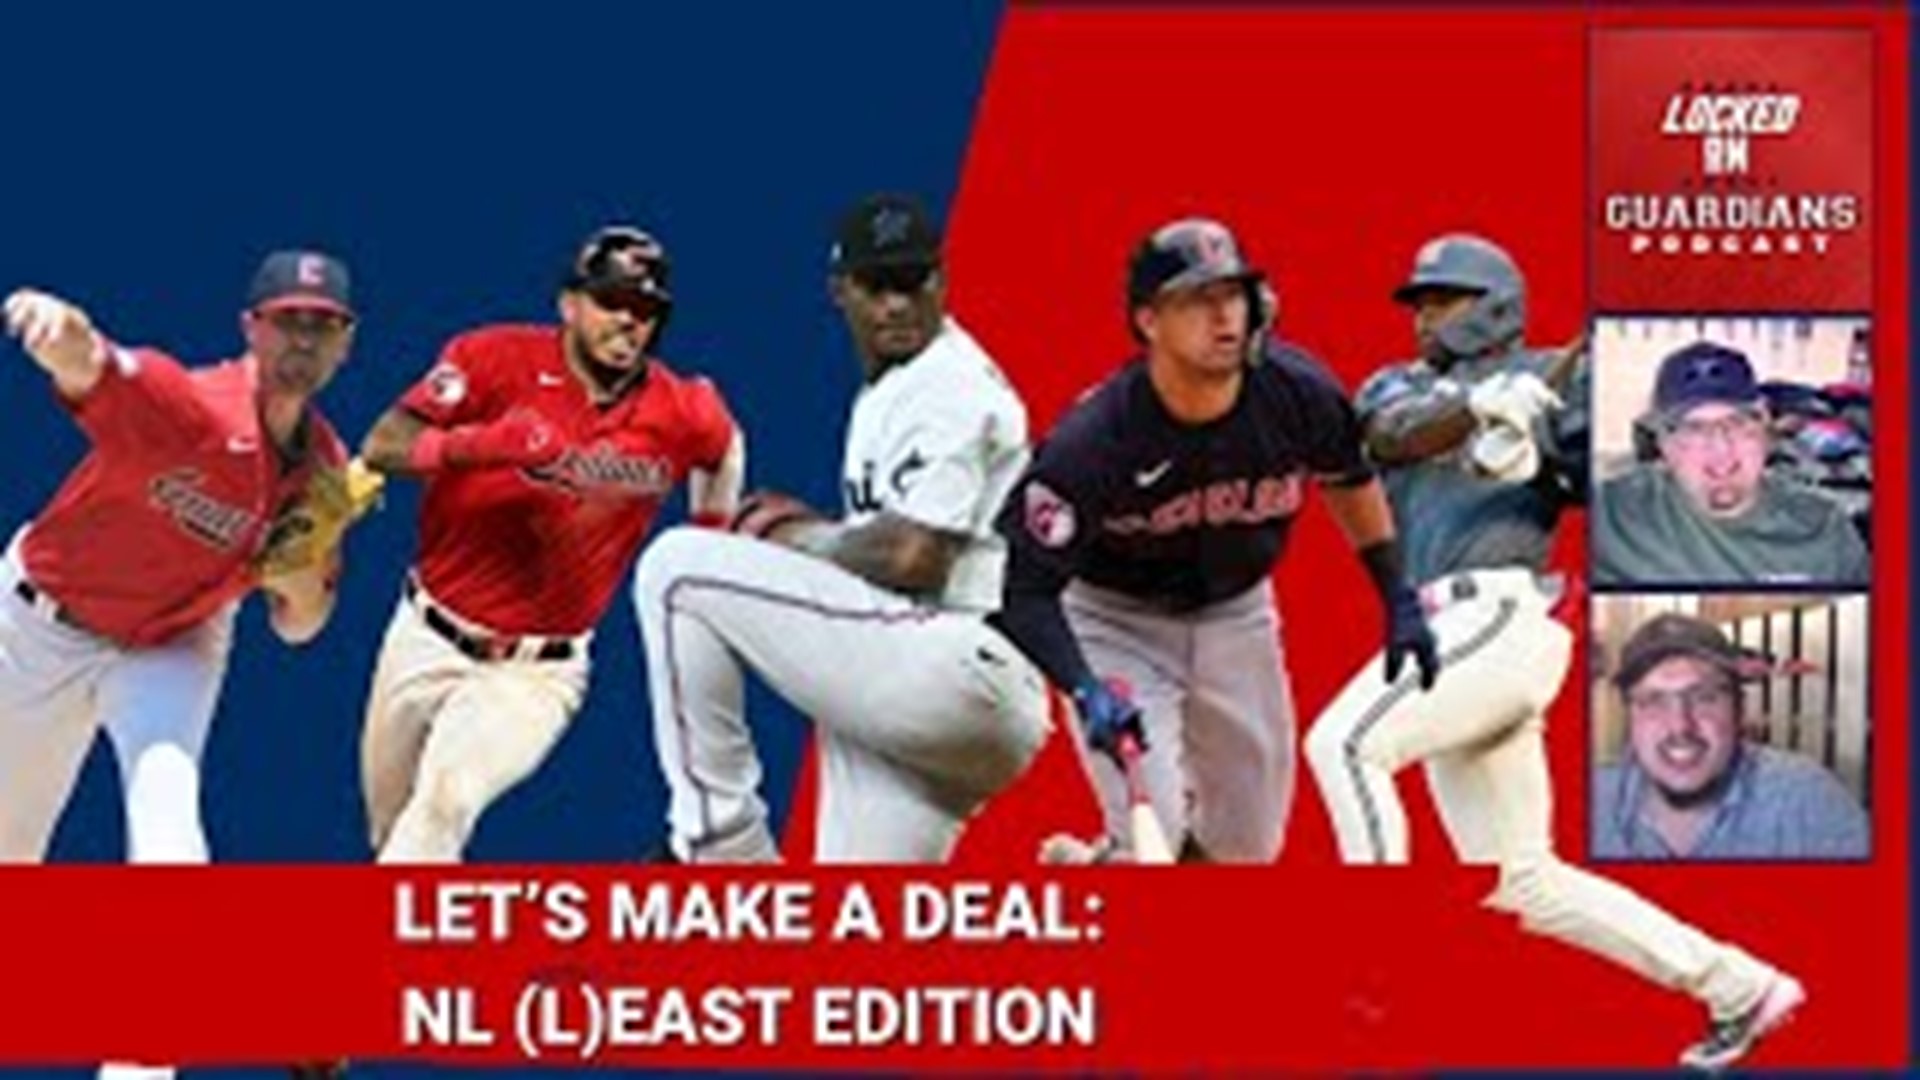 It's the dead of winter and MLB"s offseason stove has also gone frigid, so we're cooking up another edition of Let's Make a Deal for the Guardians with the NL East.